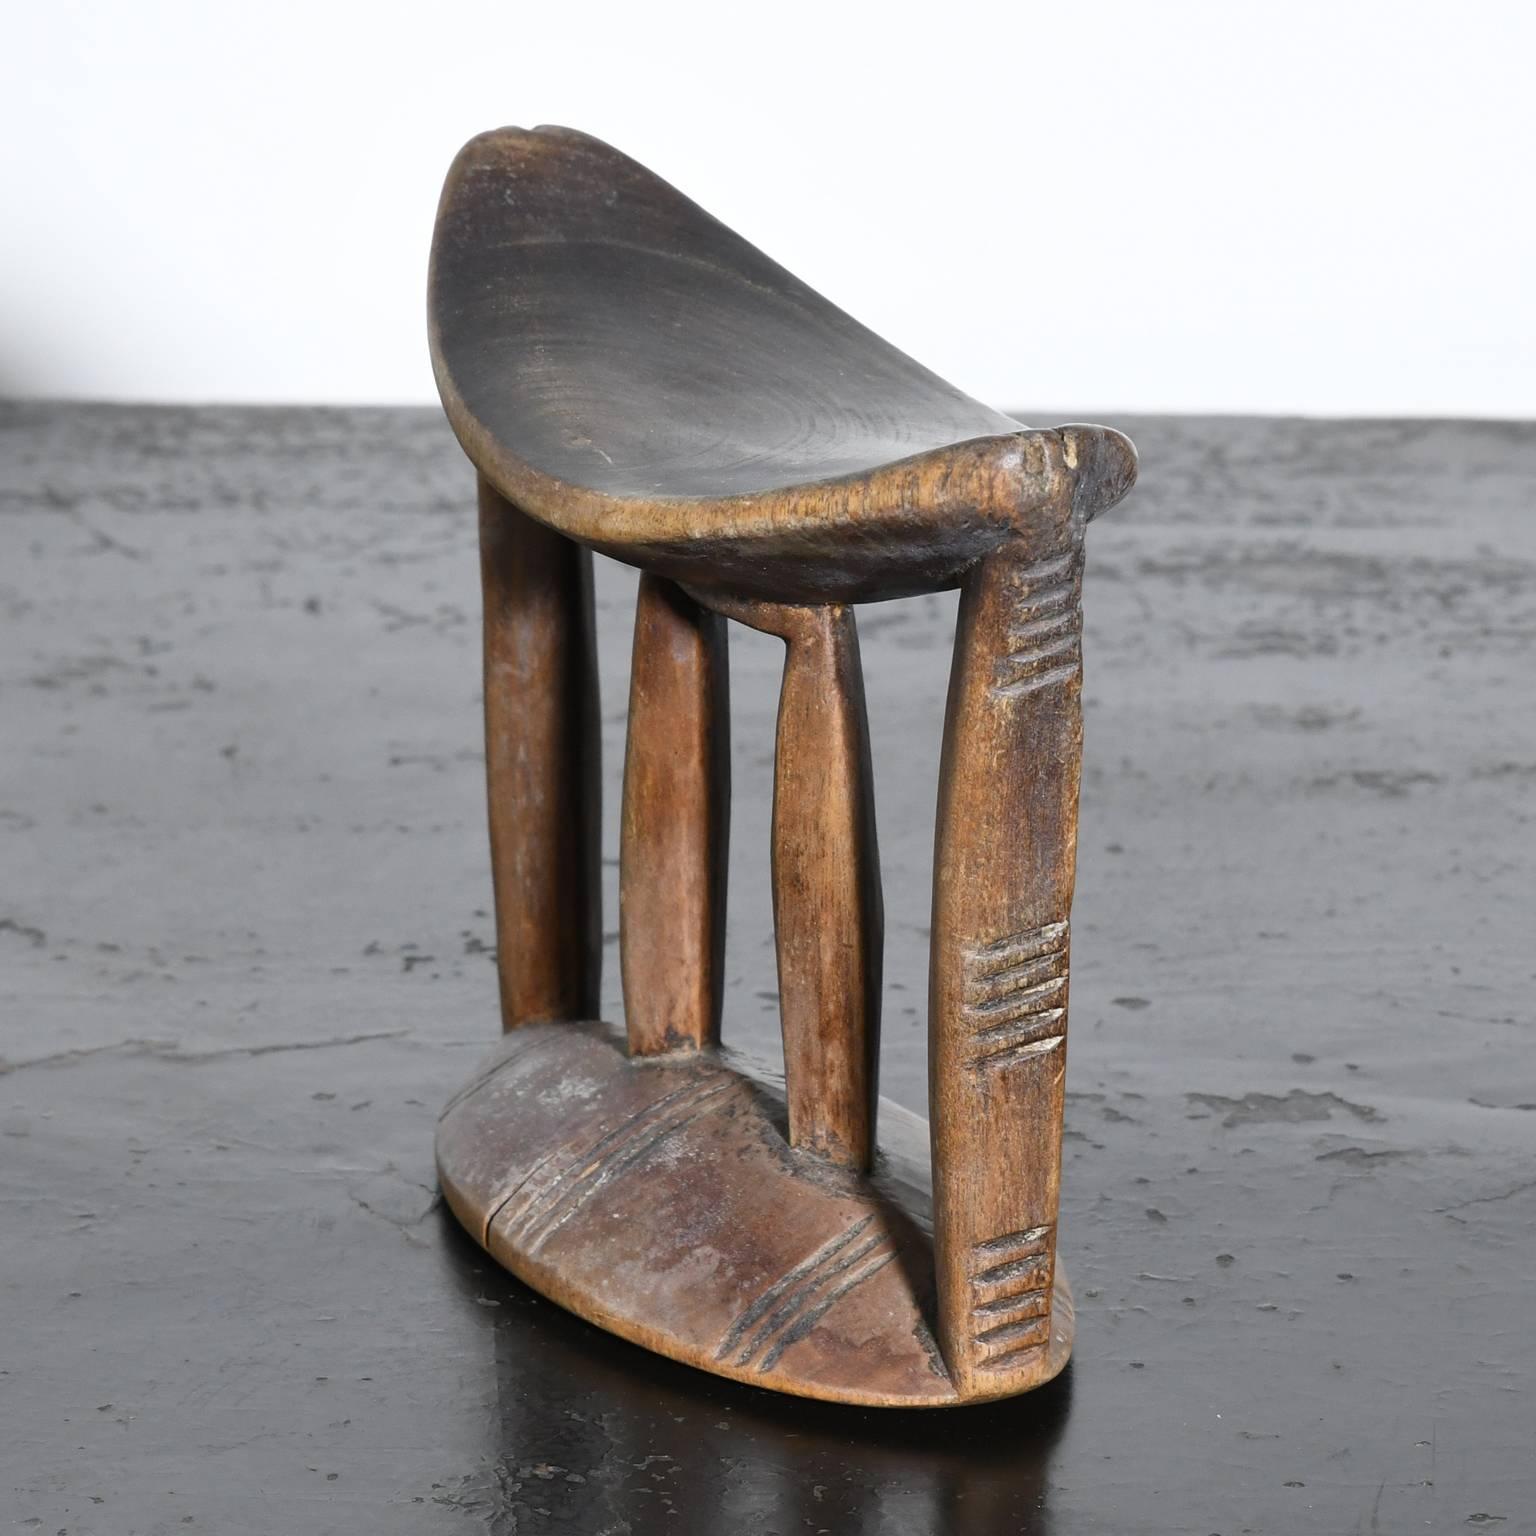 A Traditional Primitive Sidamo headrest with simple incised lines from the Sidamo people of Ethiopia. It is impossible to accurately date these objects without a provenance which is rare. Headrests are part of an ongoing tradition. We can only look